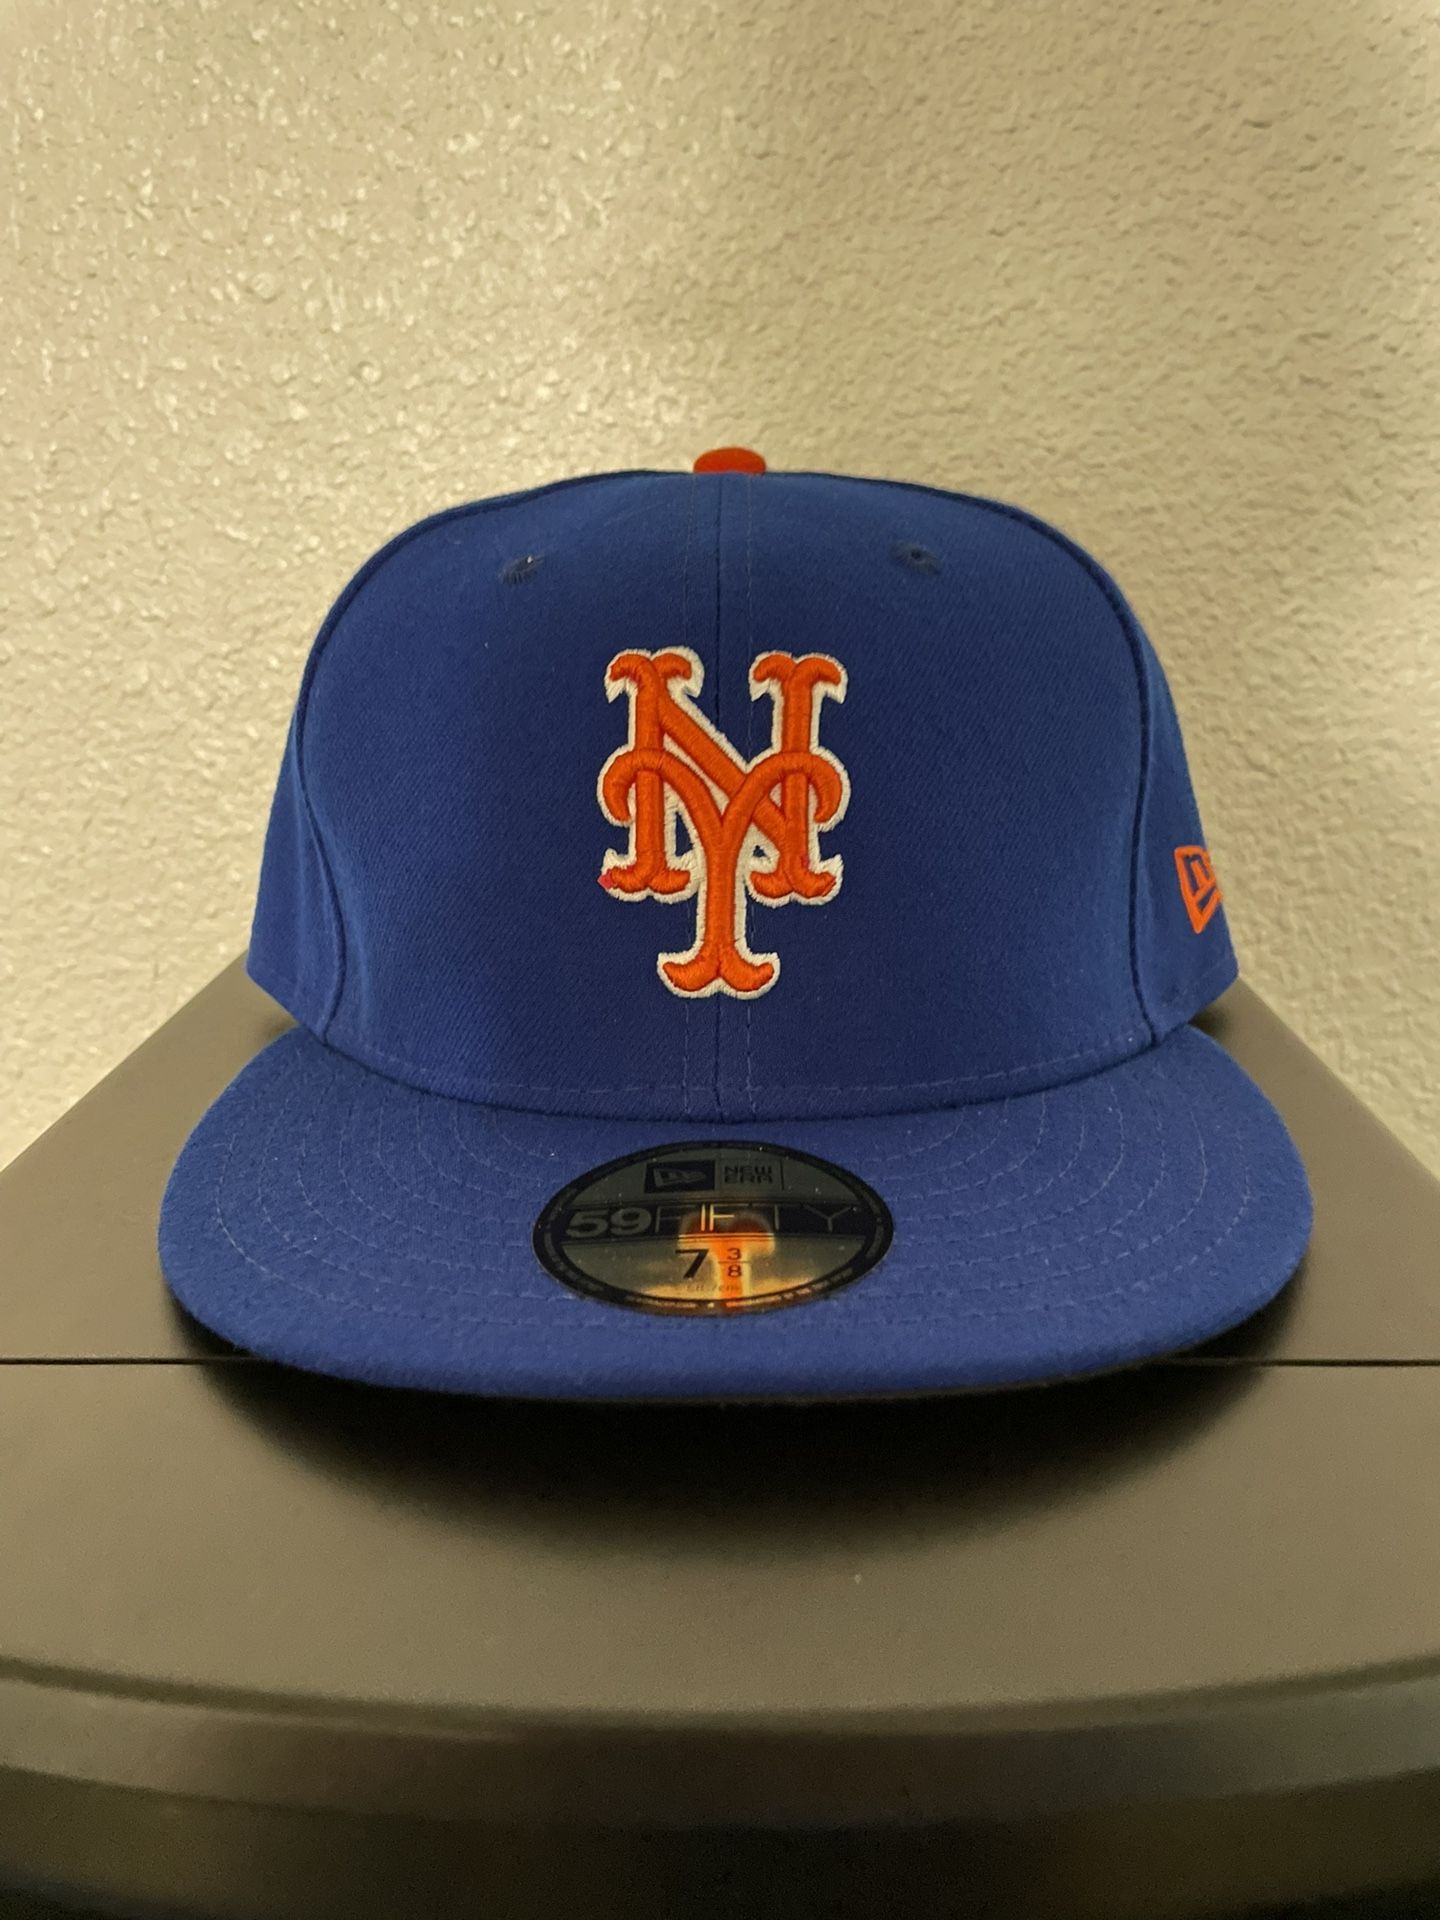 New York Mets New Era fitted hat size 7 3/8